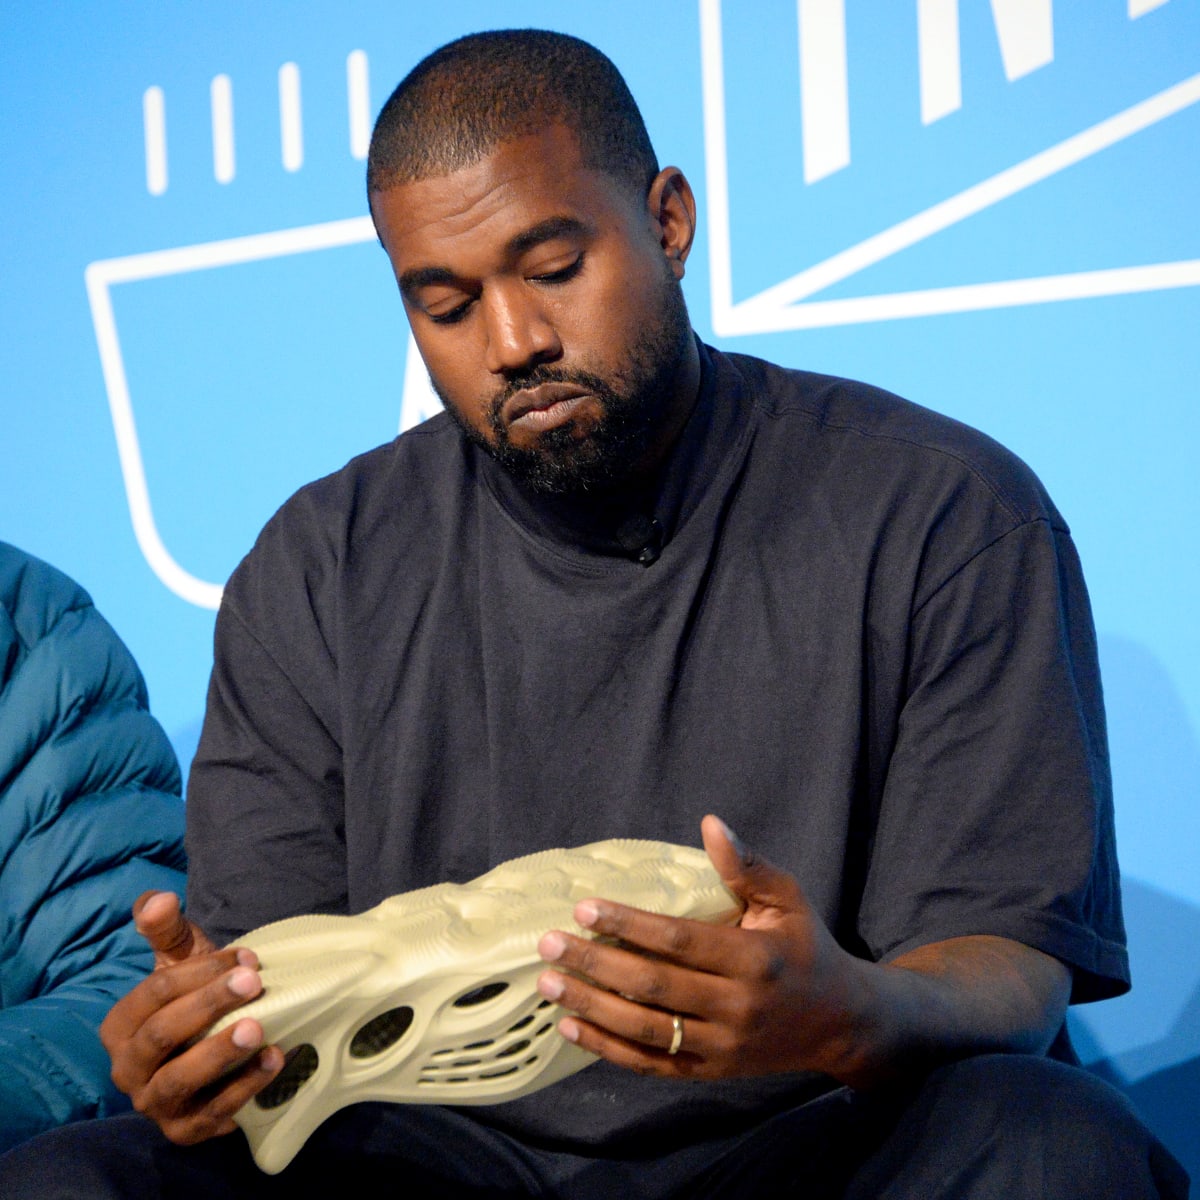 Kanye West X Louis Vuitton Shoes, Debut in Paris - Kanye Wests New Sneaker  Collection! 